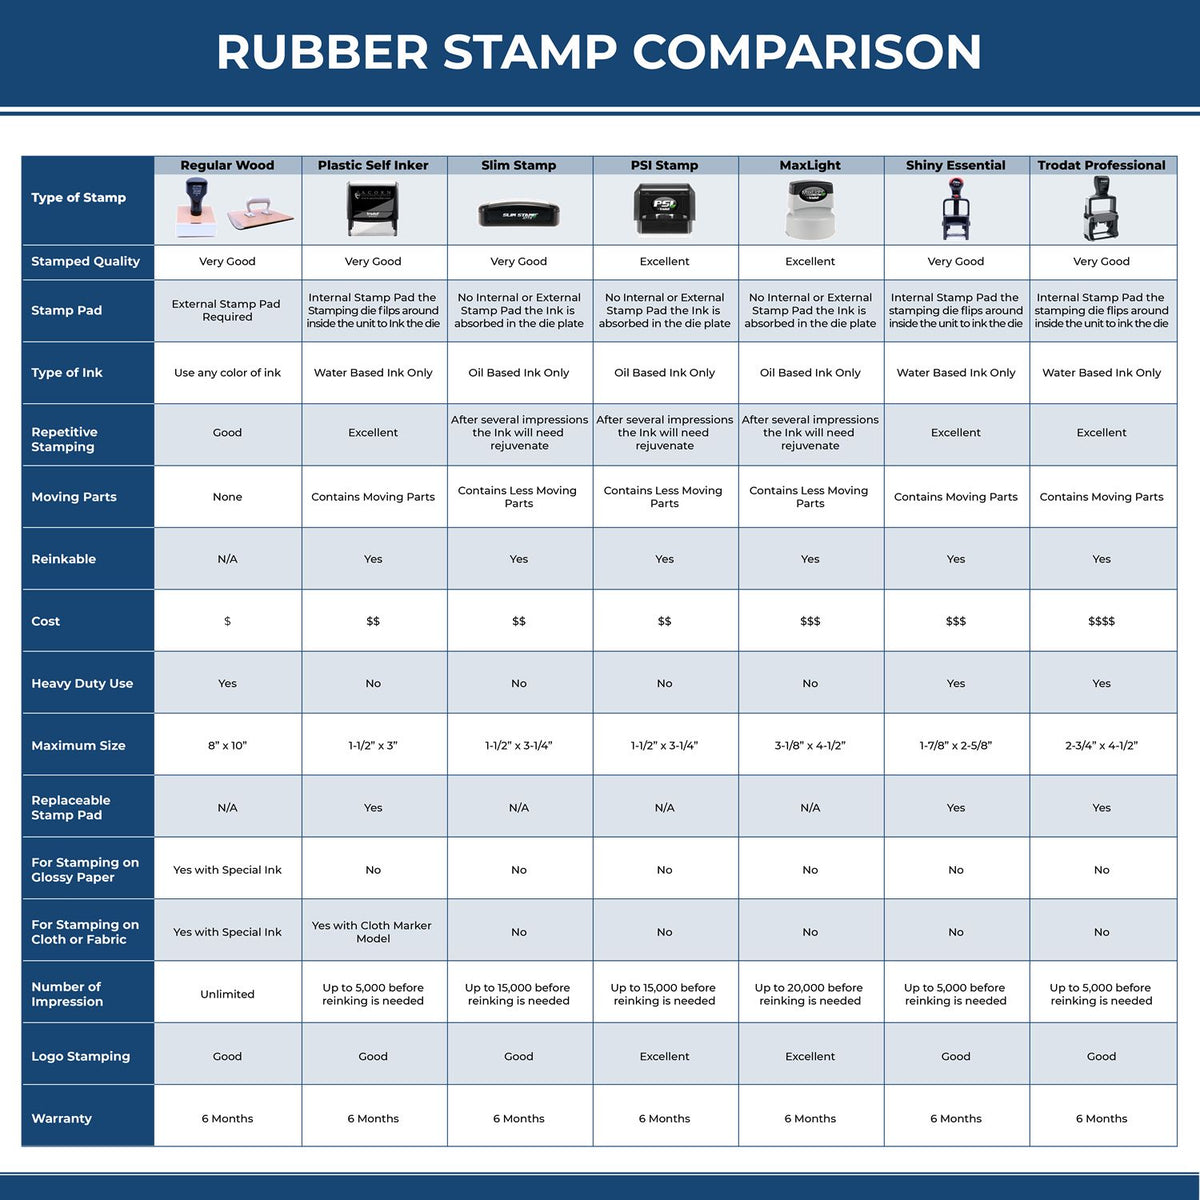 A comparison chart for the different types of mount models available for the Wooden Handle Puerto Rico Rectangular Notary Public Stamp.